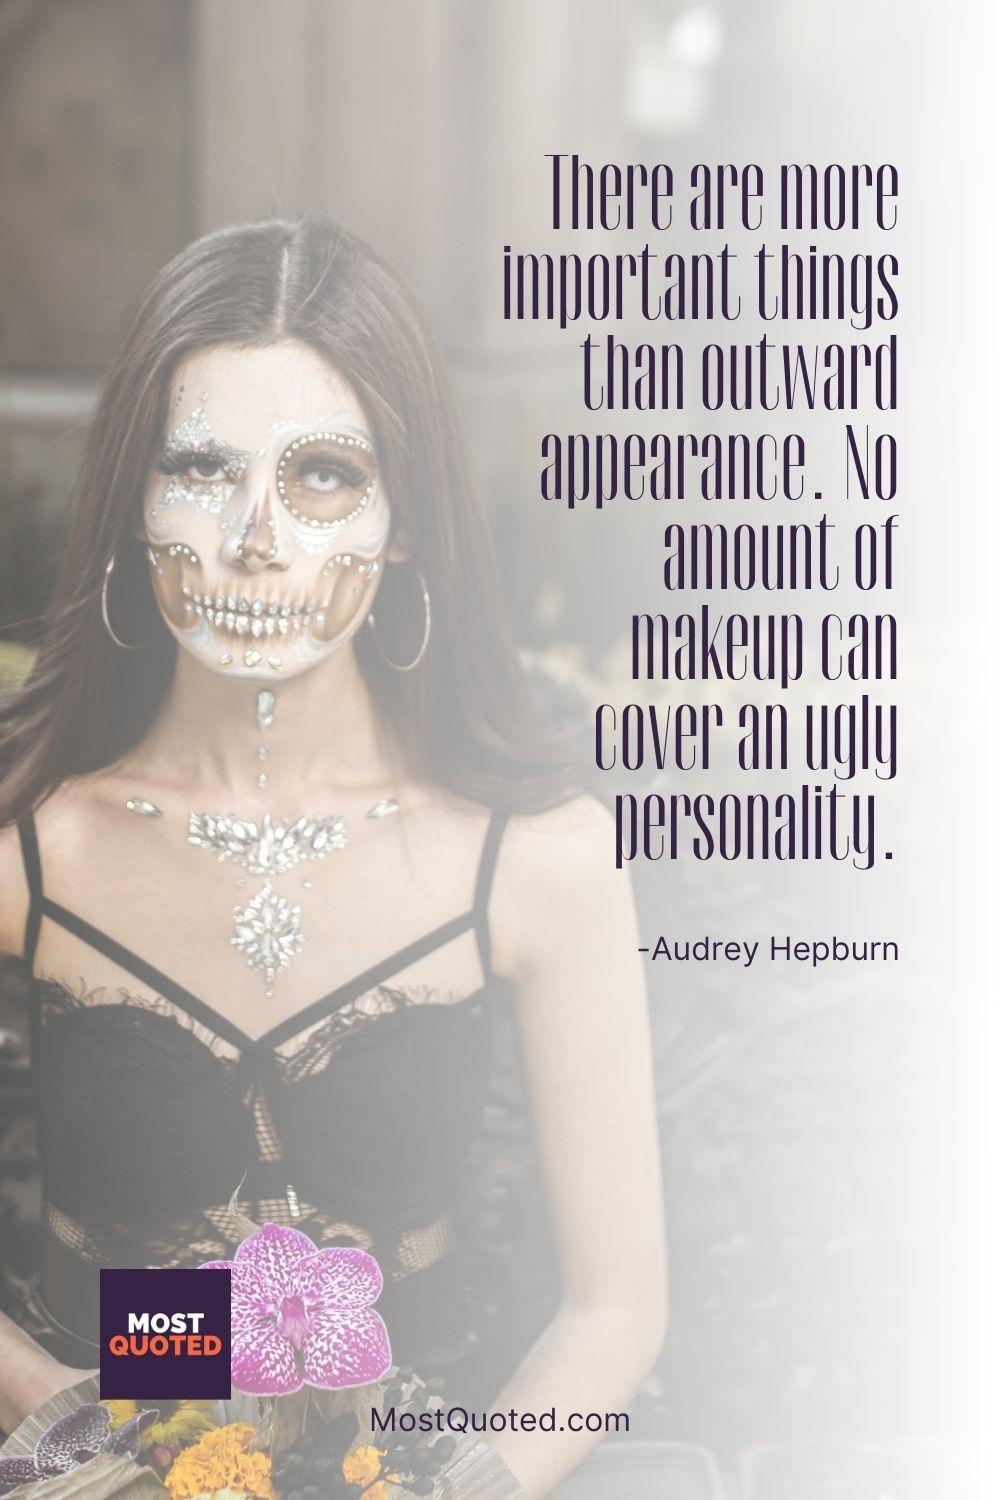 There are more important things than outward appearance. No amount of makeup can cover an ugly personality. - Audrey Hepburn